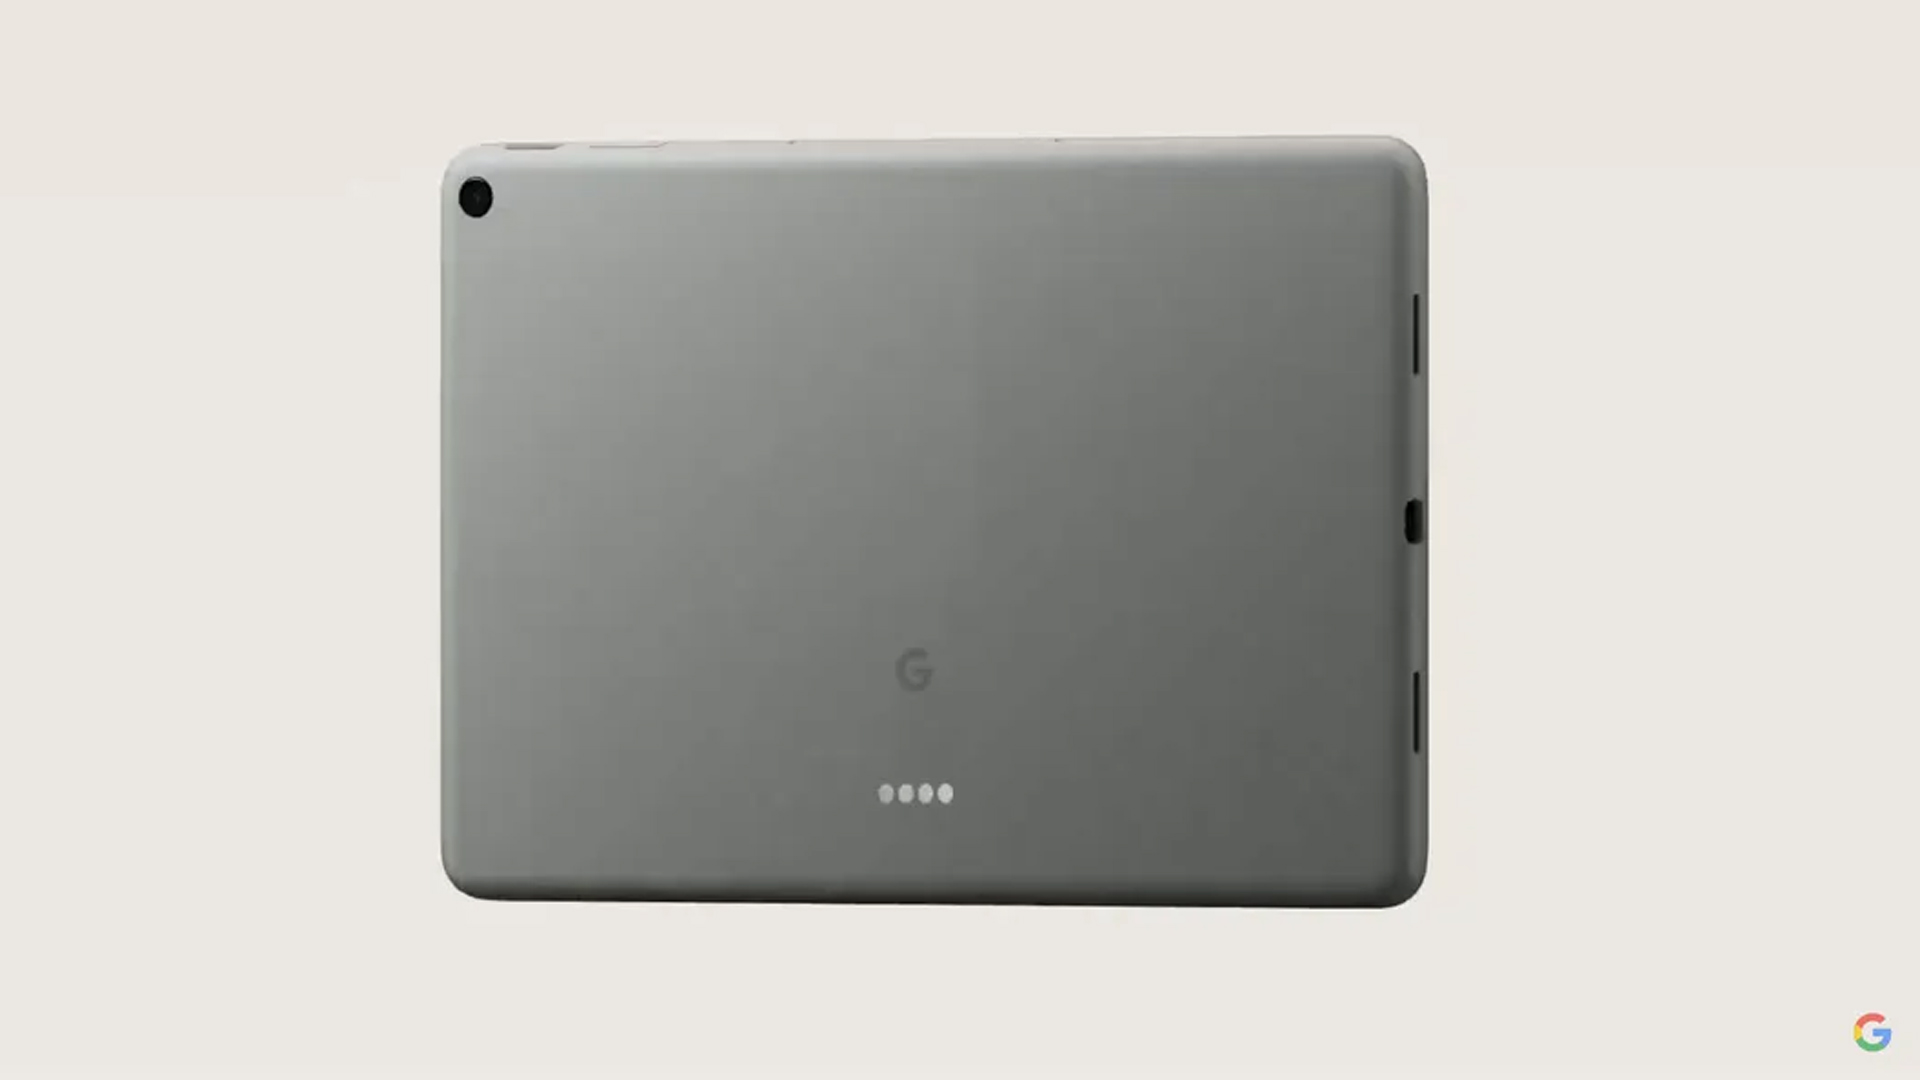 The smart connector of the Pixel tablet